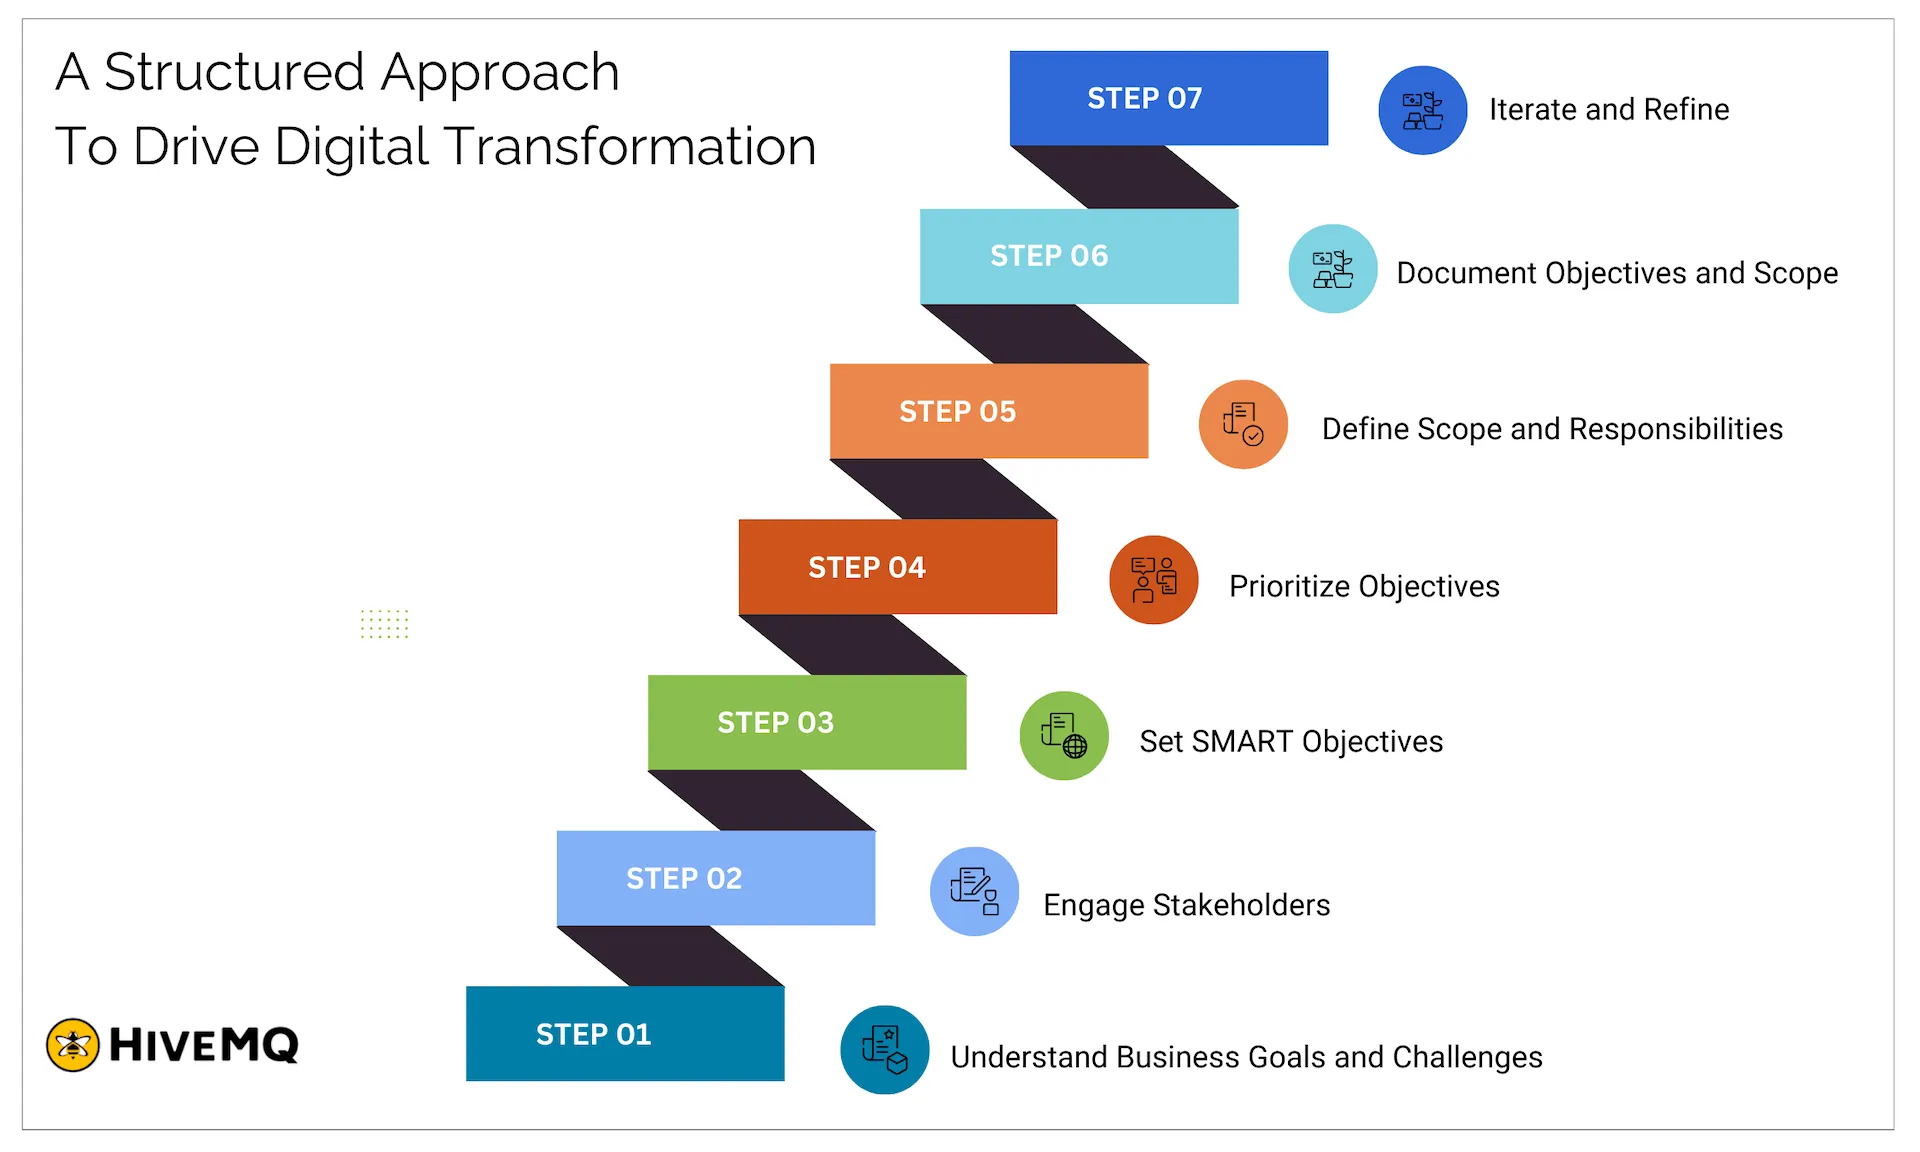 A structured approach to drive digital transformation